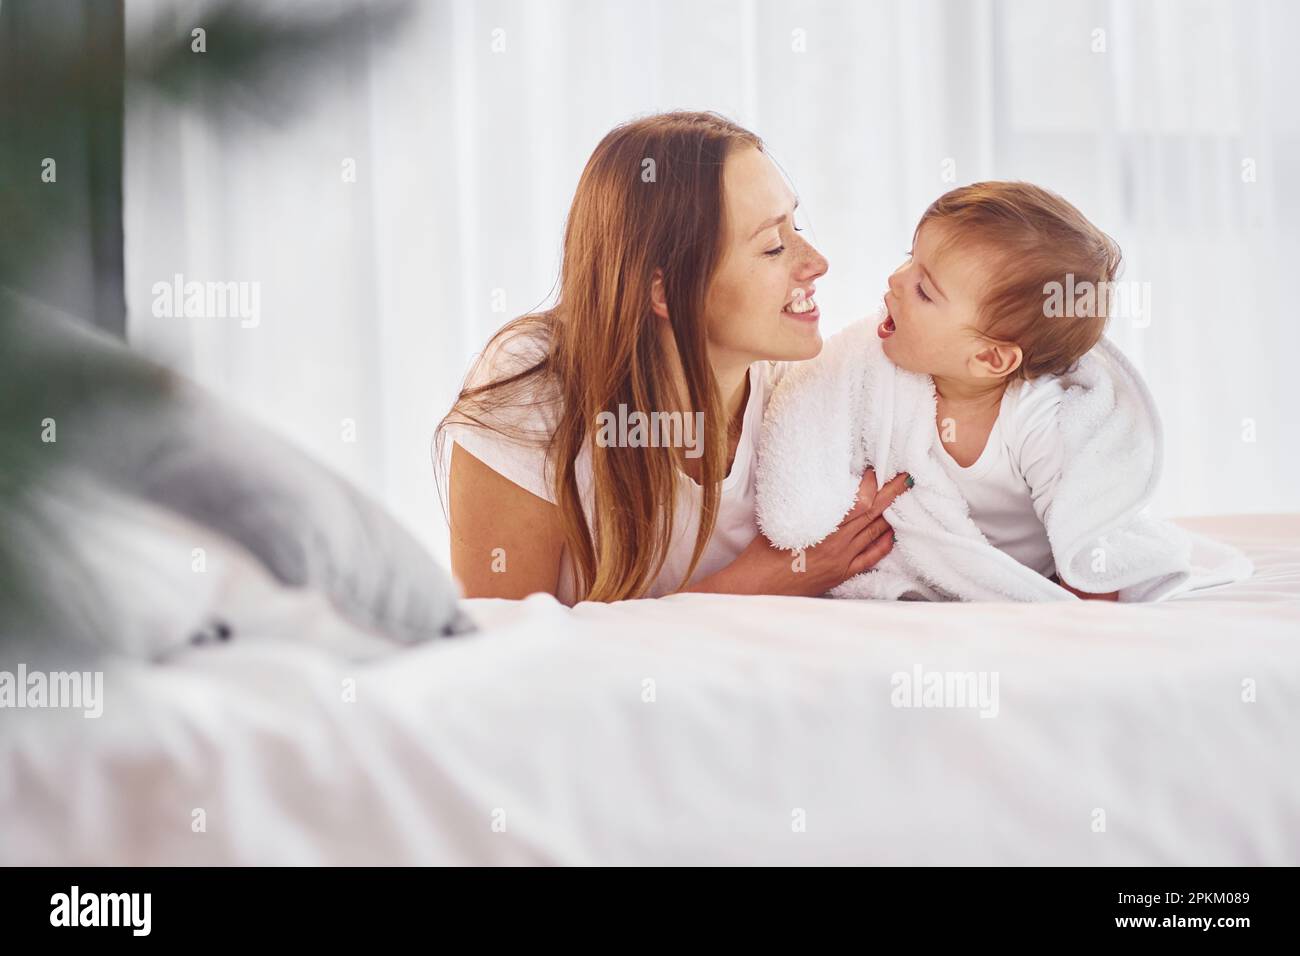 Laying down on the bed. Mother with her little daughter is indoors at home together. Stock Photo